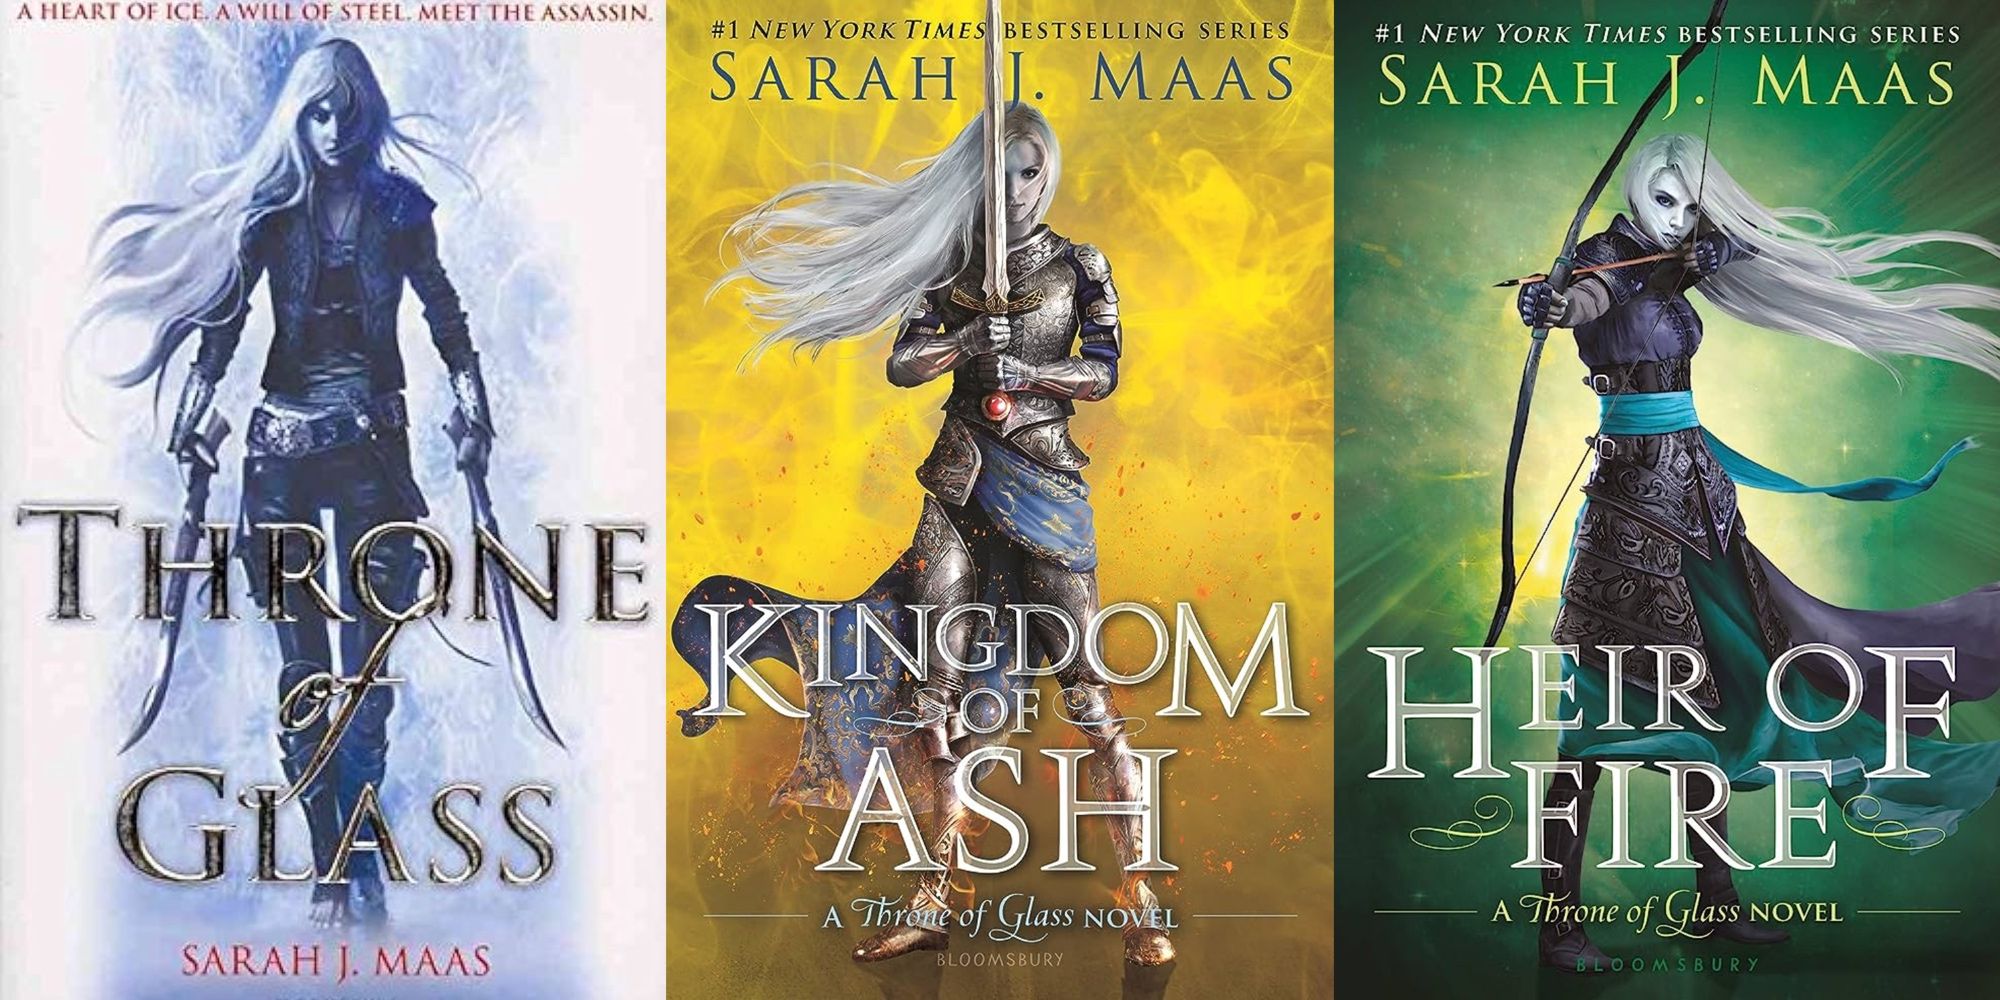 A split image of three books from the Throne of Glass series: Throne of Glass, Kingdom of Ash, and Heir of Fire